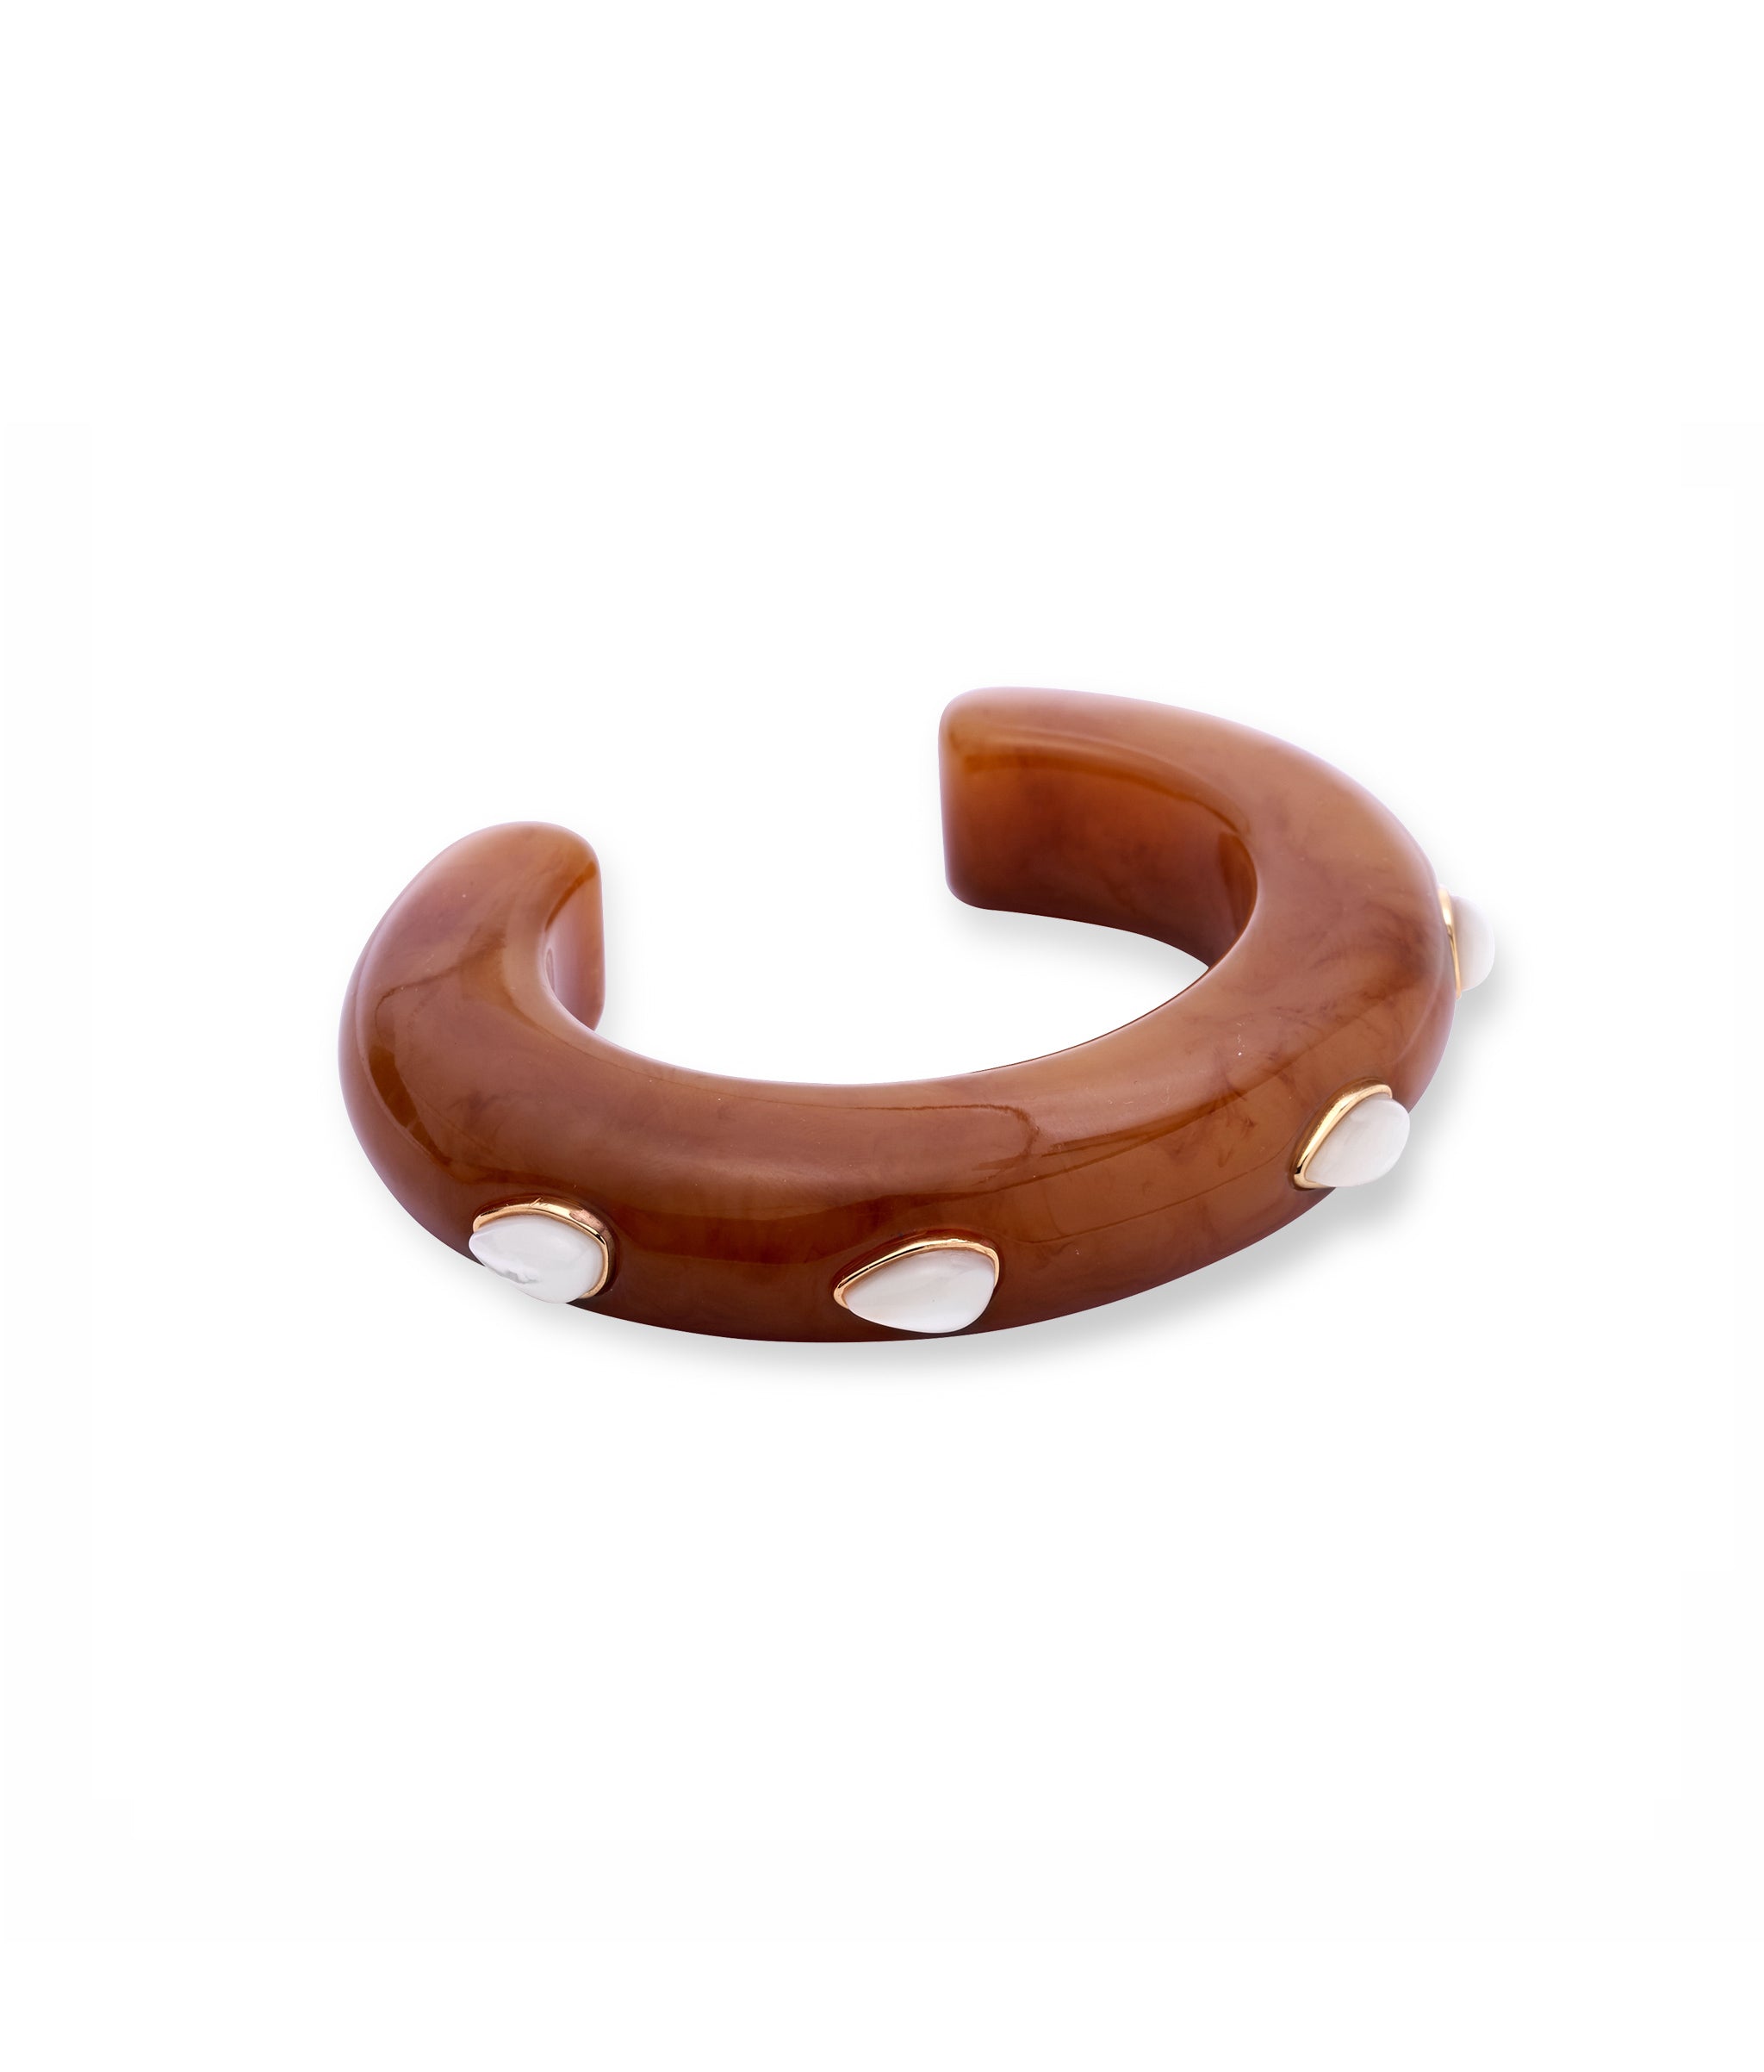 Ridge Cuff in Mocha and Pearl. Dark brown thin acrylic domed cuff with gold-plated bezels and abstract mother-of-pearl stones